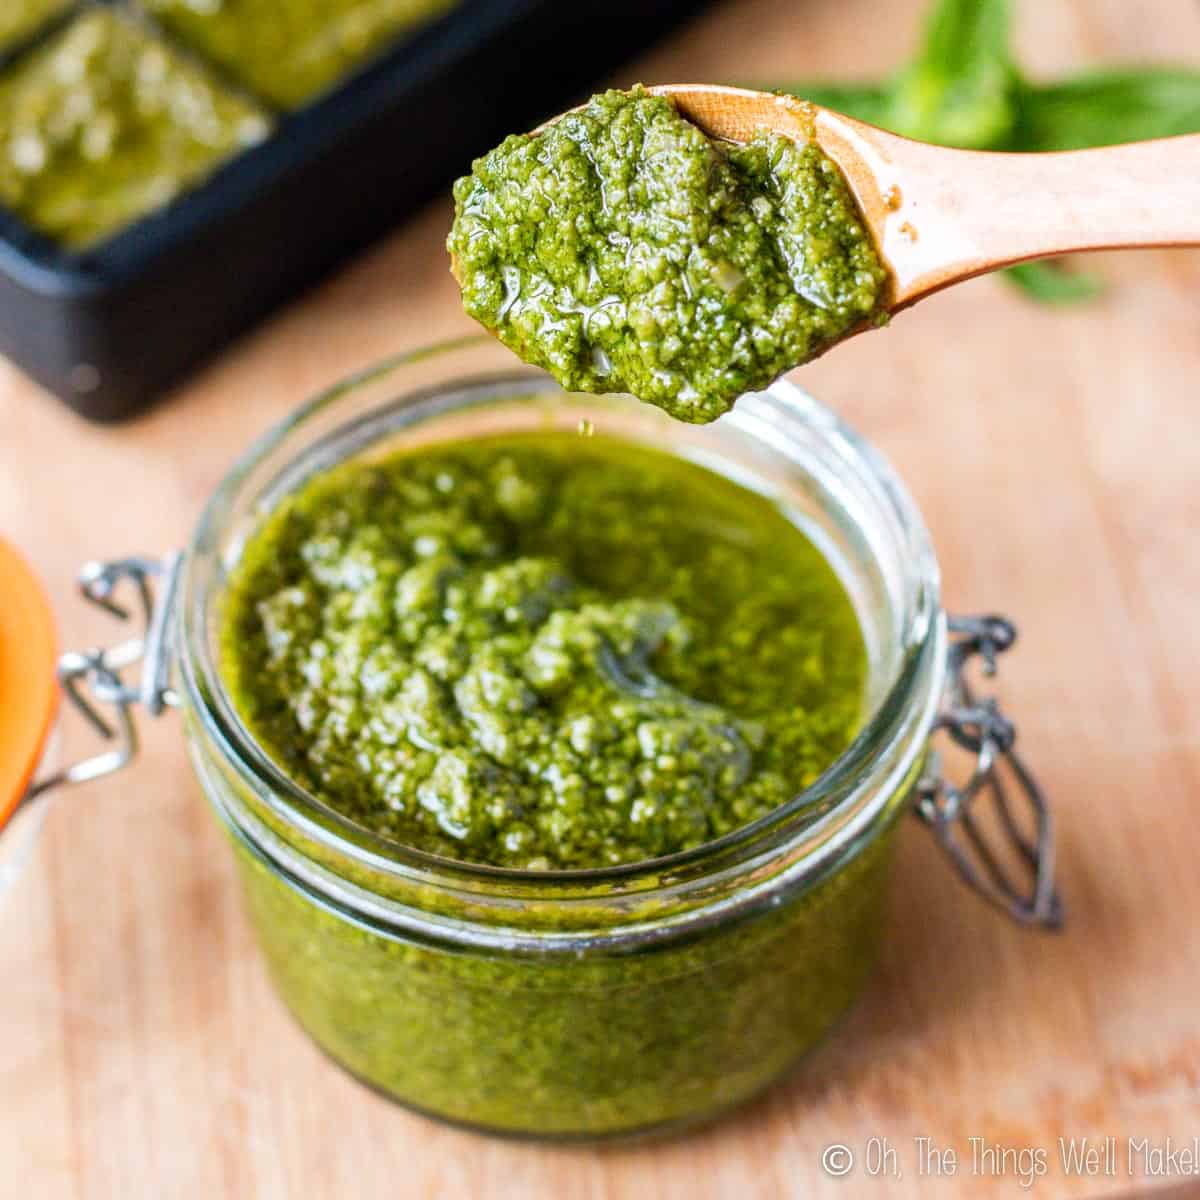 Spooning up some homemade pesto sauce out from a glass jar. 